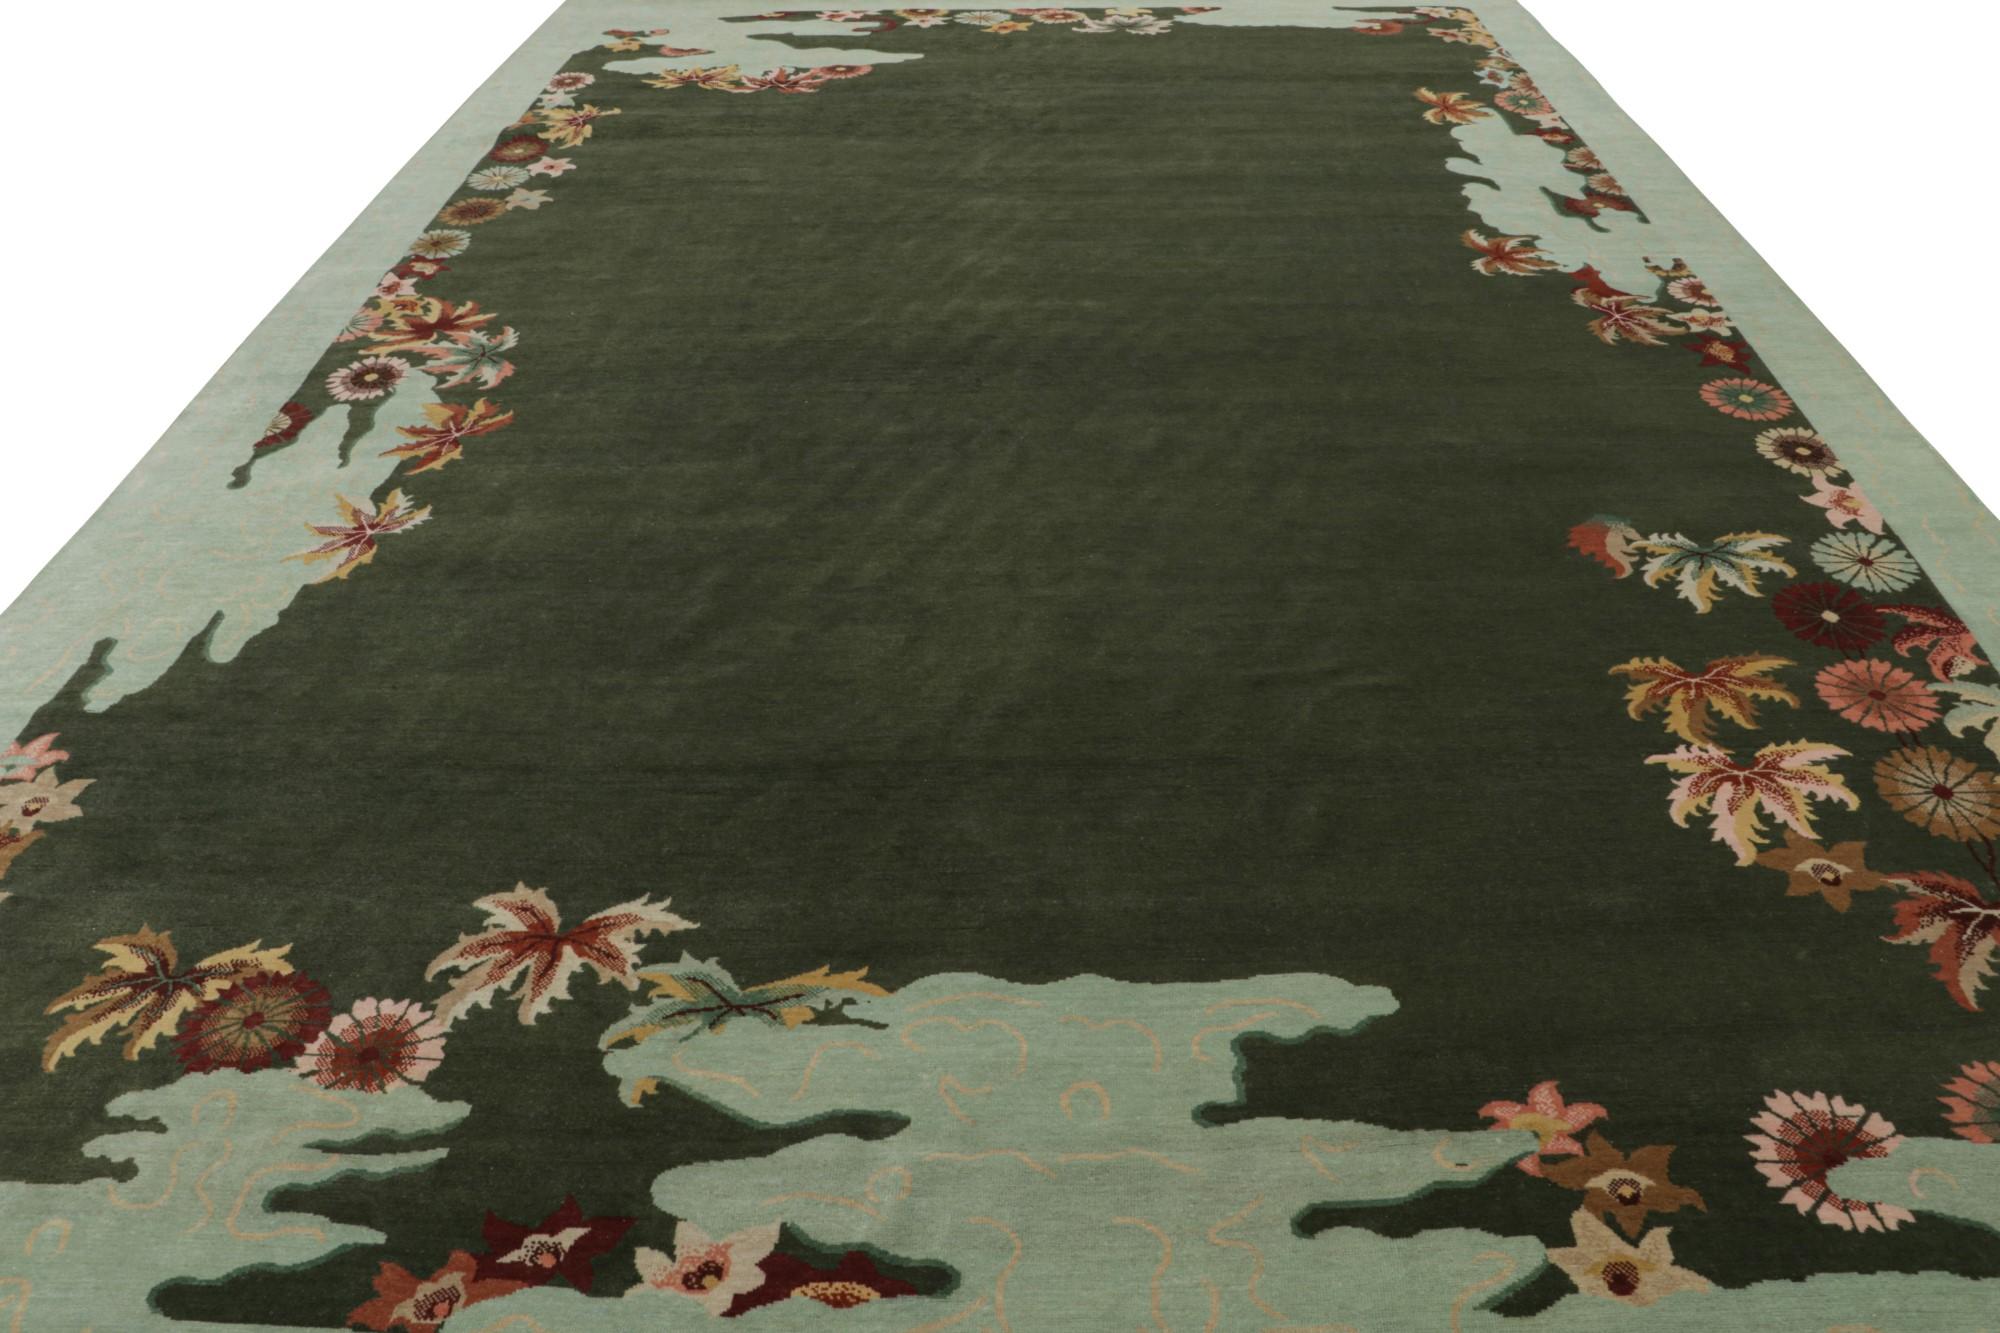 Indian Rug & Kilim’s Chinese Art Deco Style Oversized Rug in Green with Floral Patterns For Sale